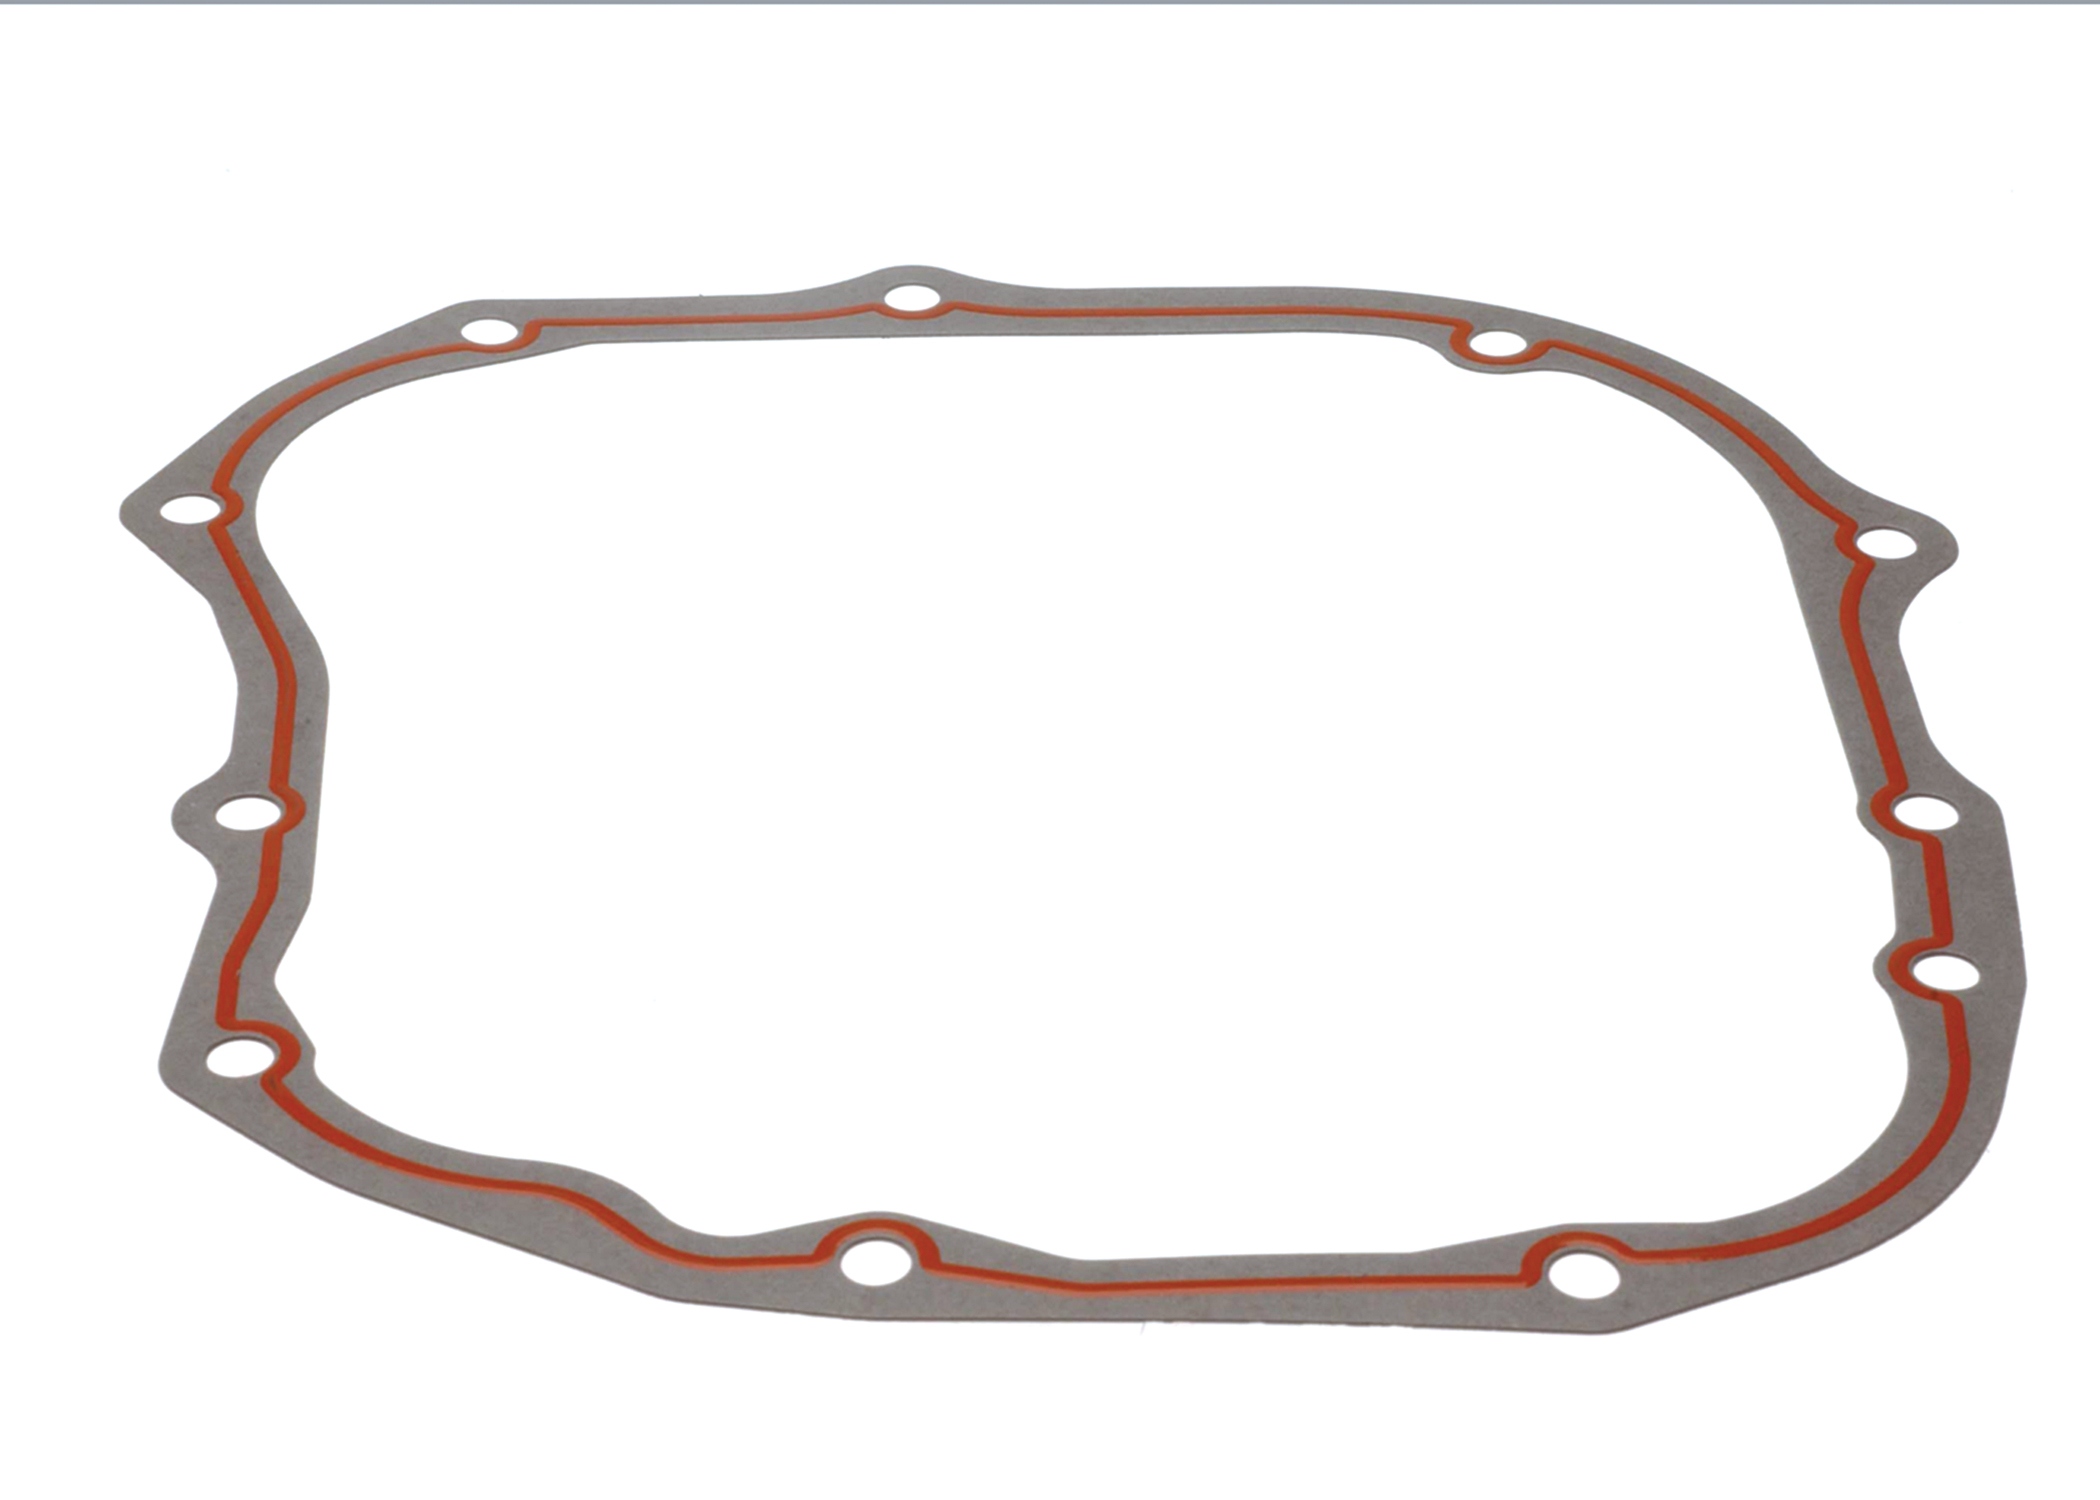 GM GENUINE PARTS - Automatic Transmission Valve Body Cover Gasket - GMP 8678169